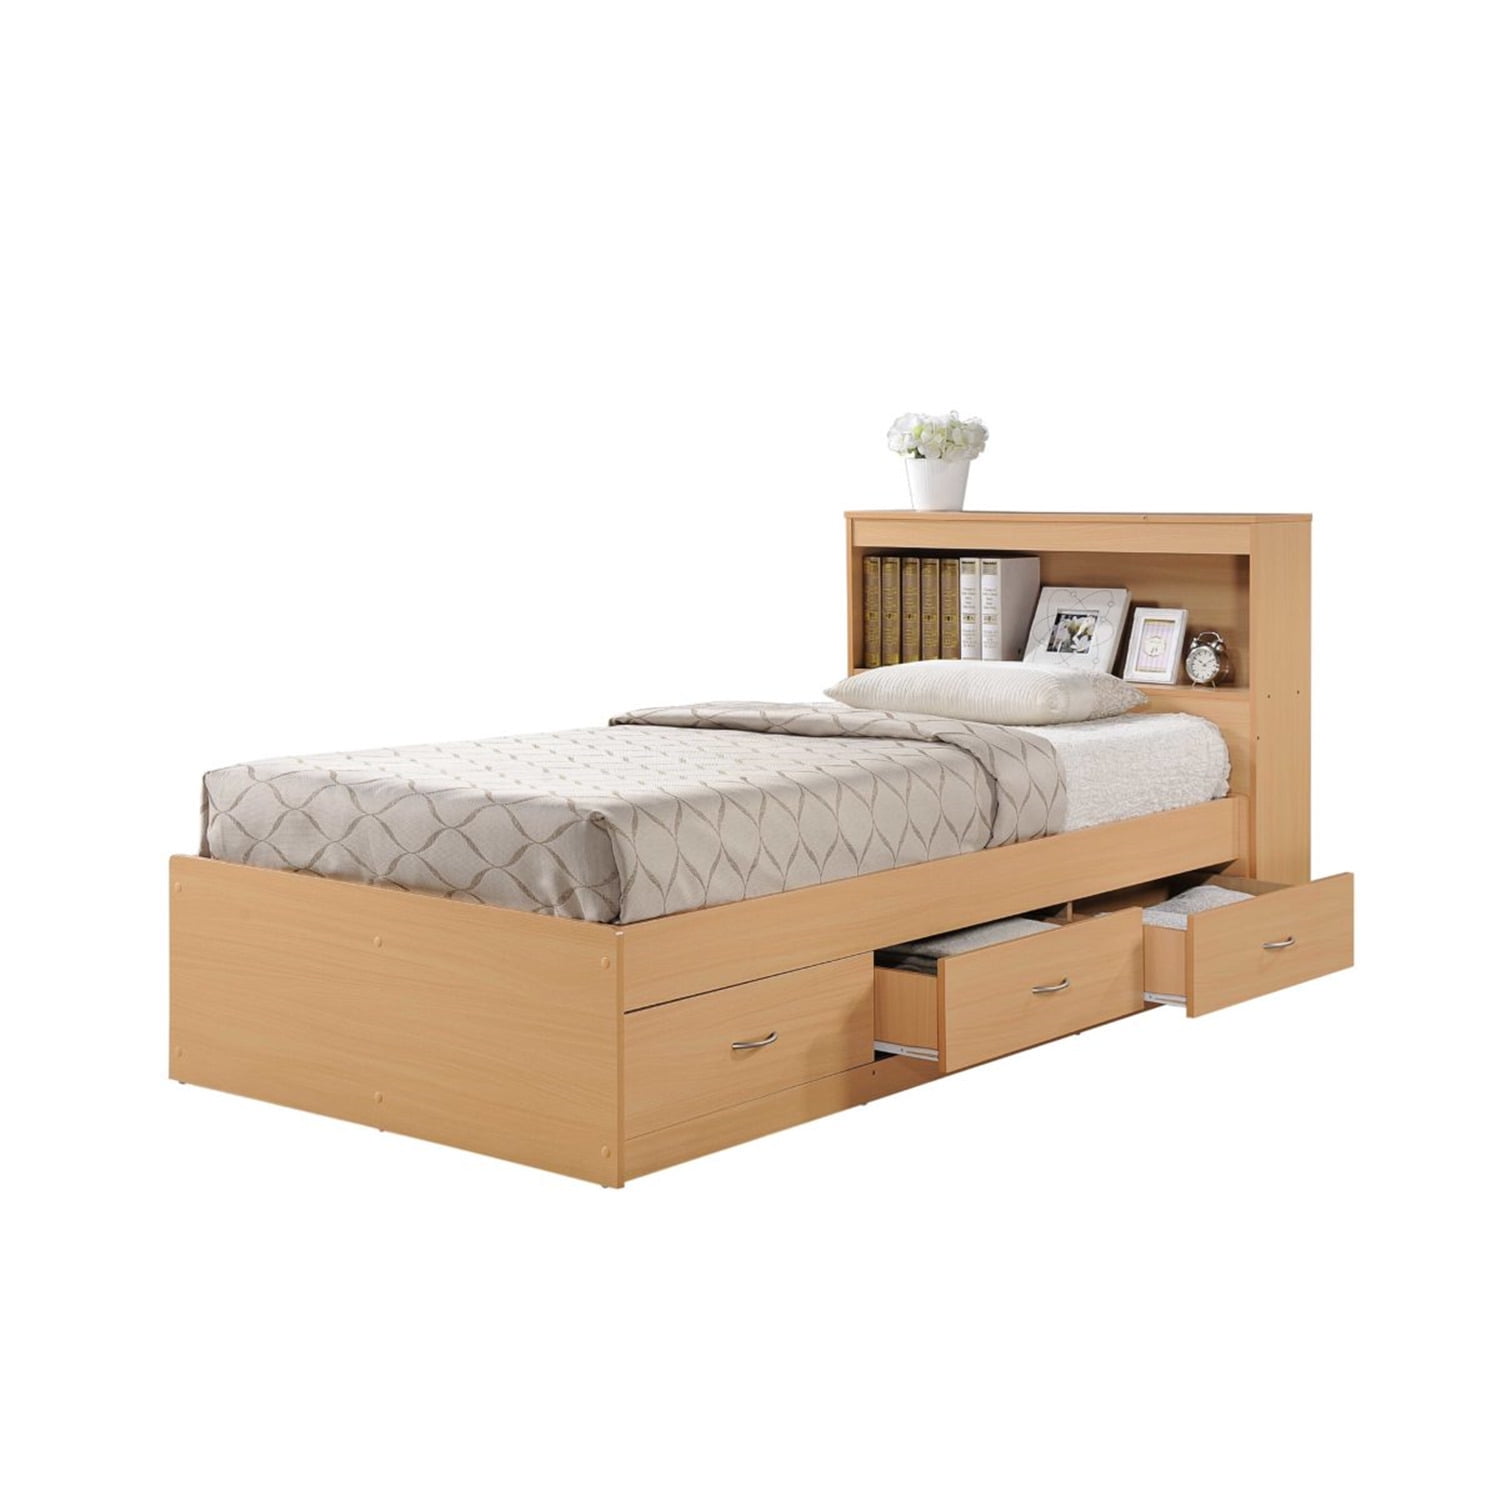 Hodedah Twin Size Captain Bed With 3, Full Size Captains Bed Frames With Headboards